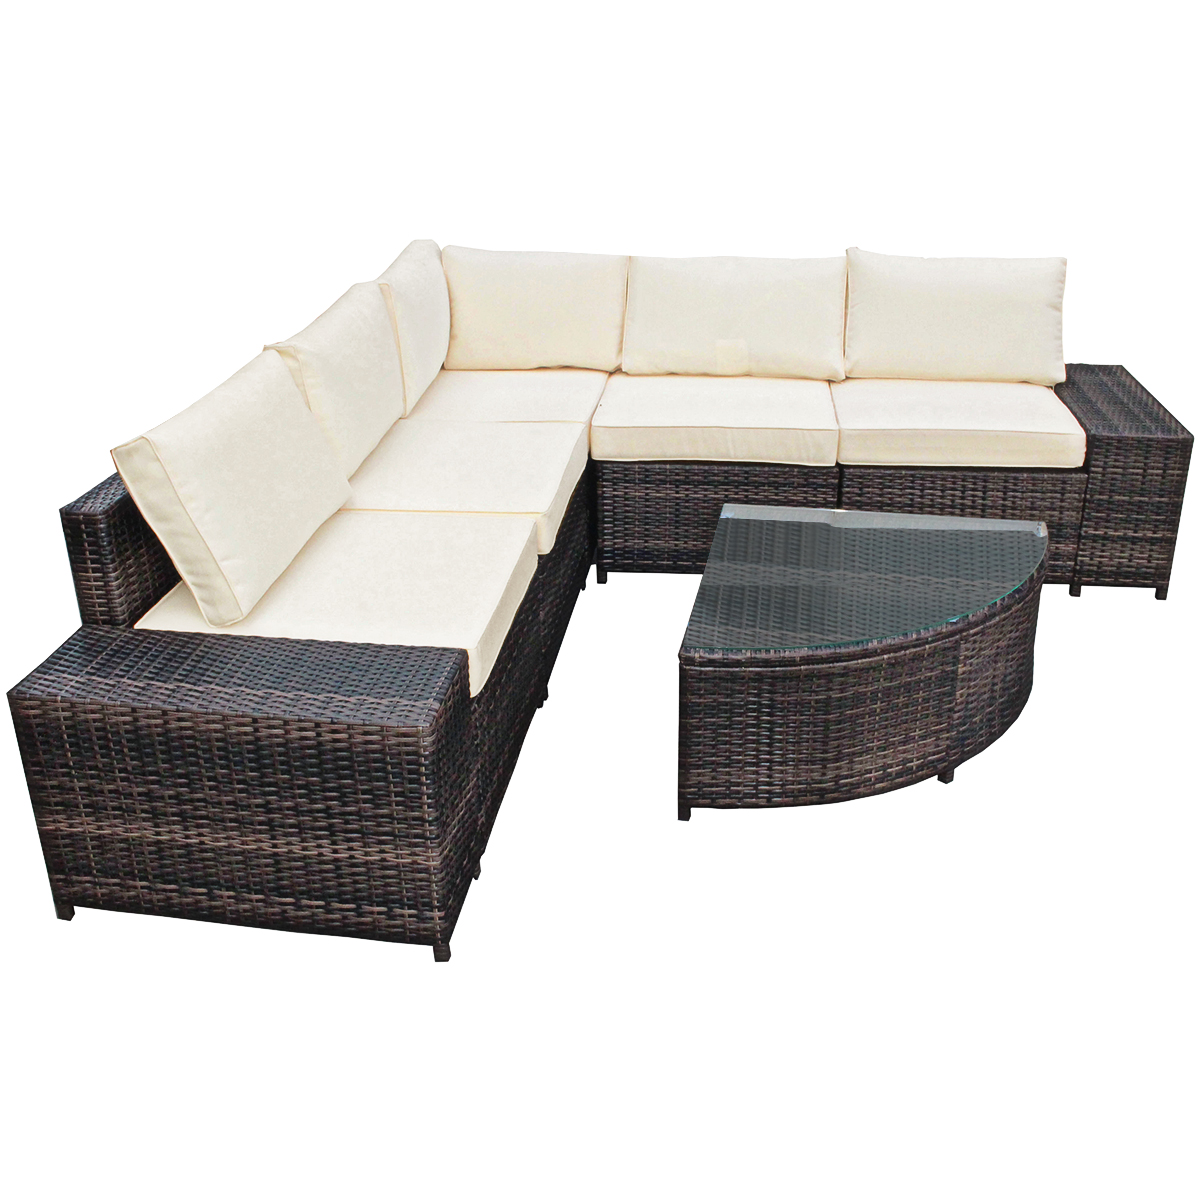 Patiojoy 6-Piece Outdoor Rattan Conversation Set Sectional Sofa Set with Arc-Shaped Table White - image 1 of 6